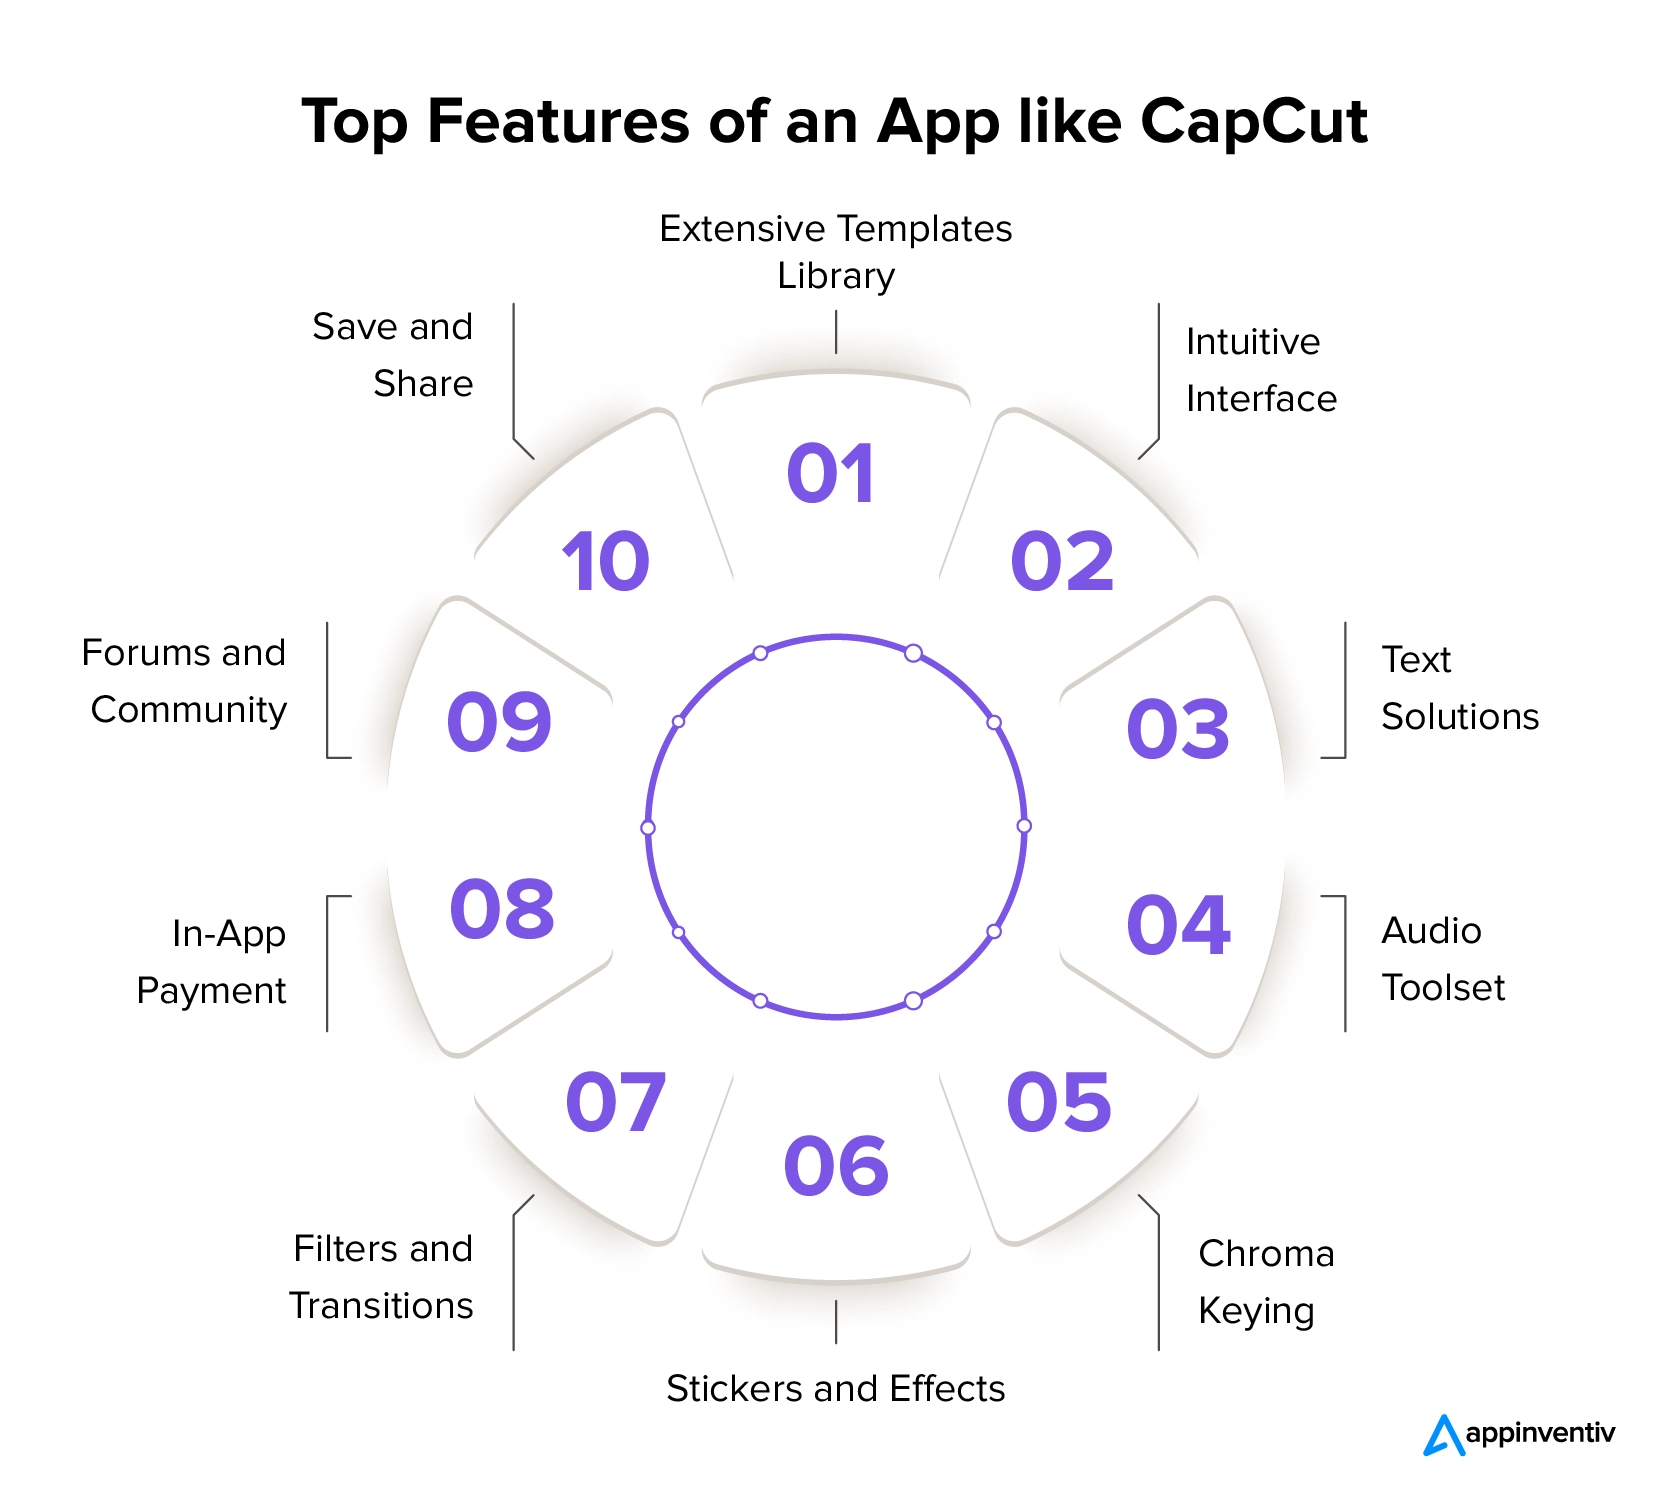 Top Features of an App like CapCut